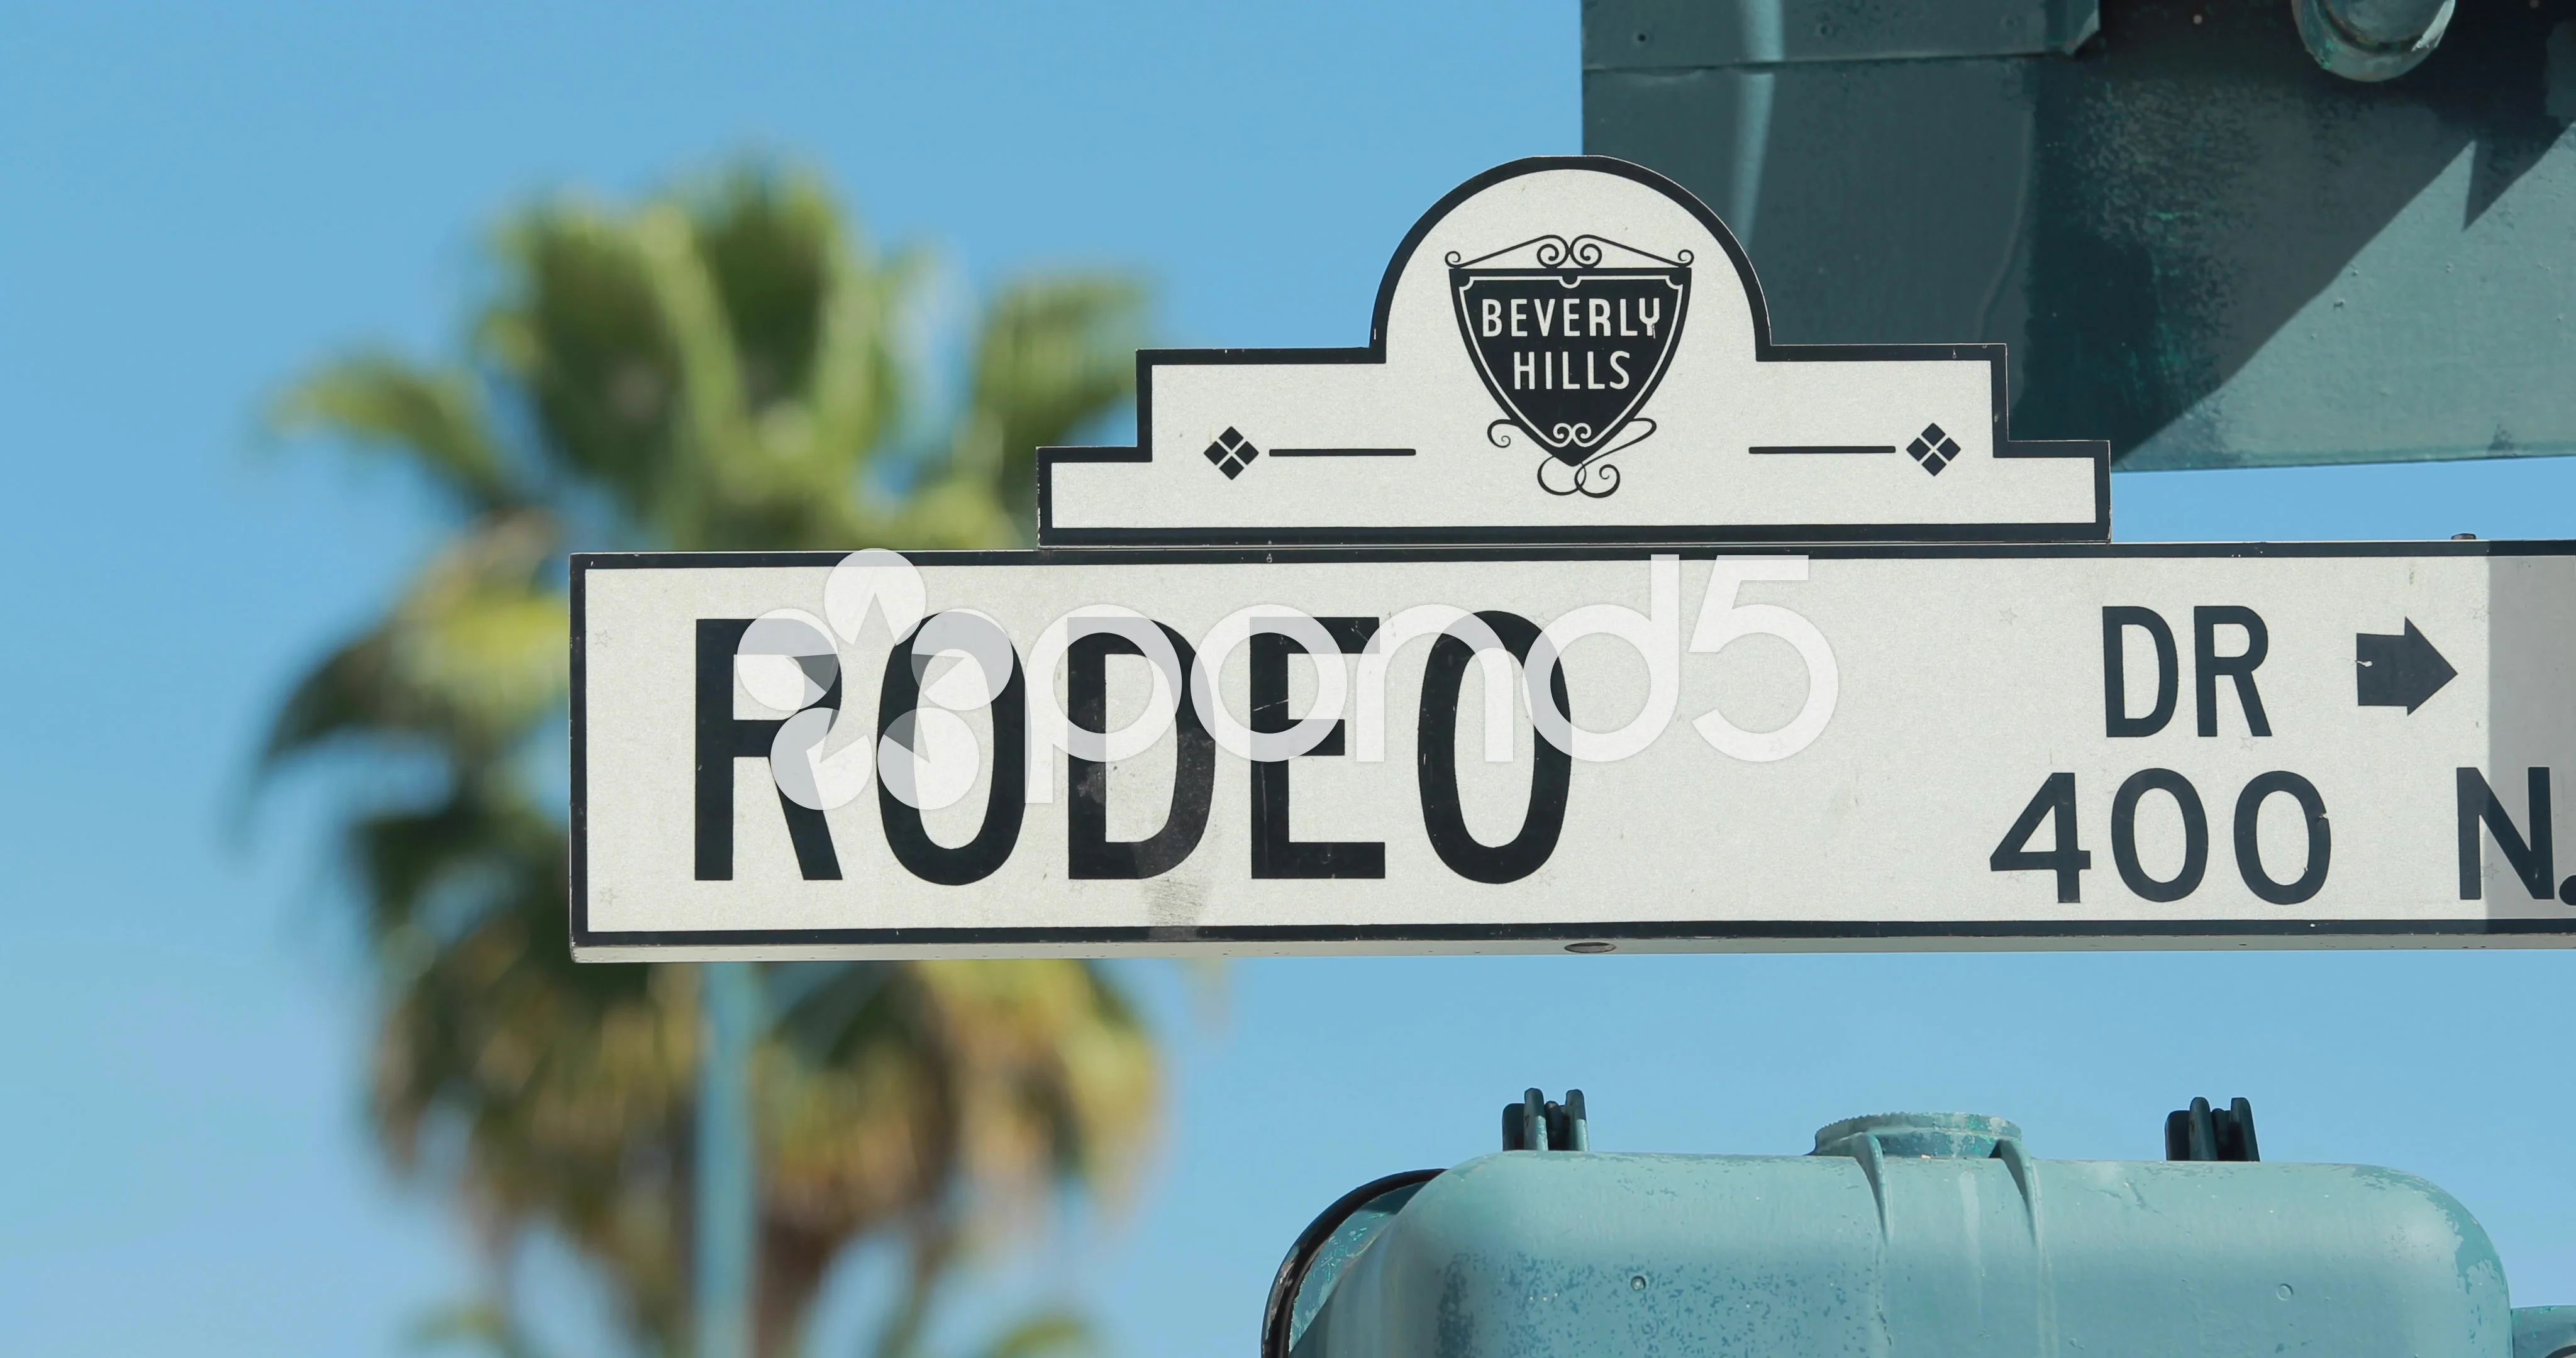 Rodeo Drive shopping area street sign in, Stock Video